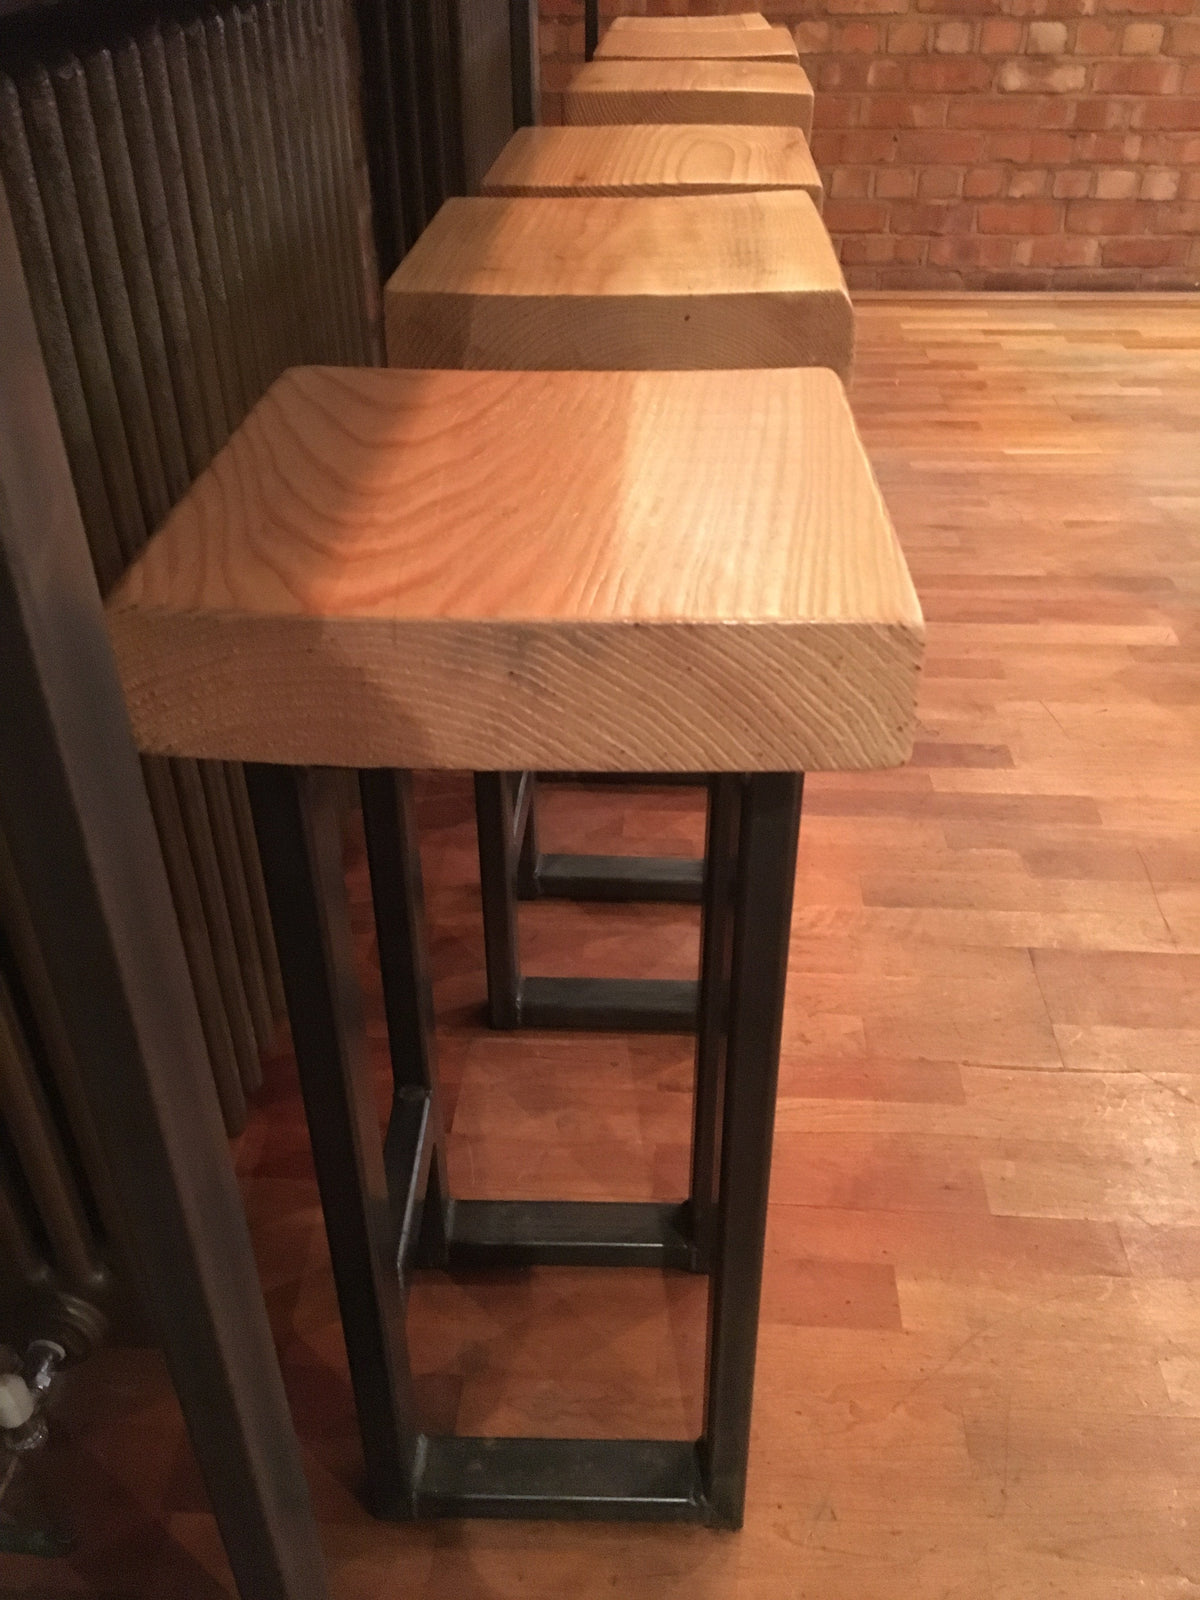 Handmade Industrial High Stool-Spitnsawdust-Contract Furniture Store